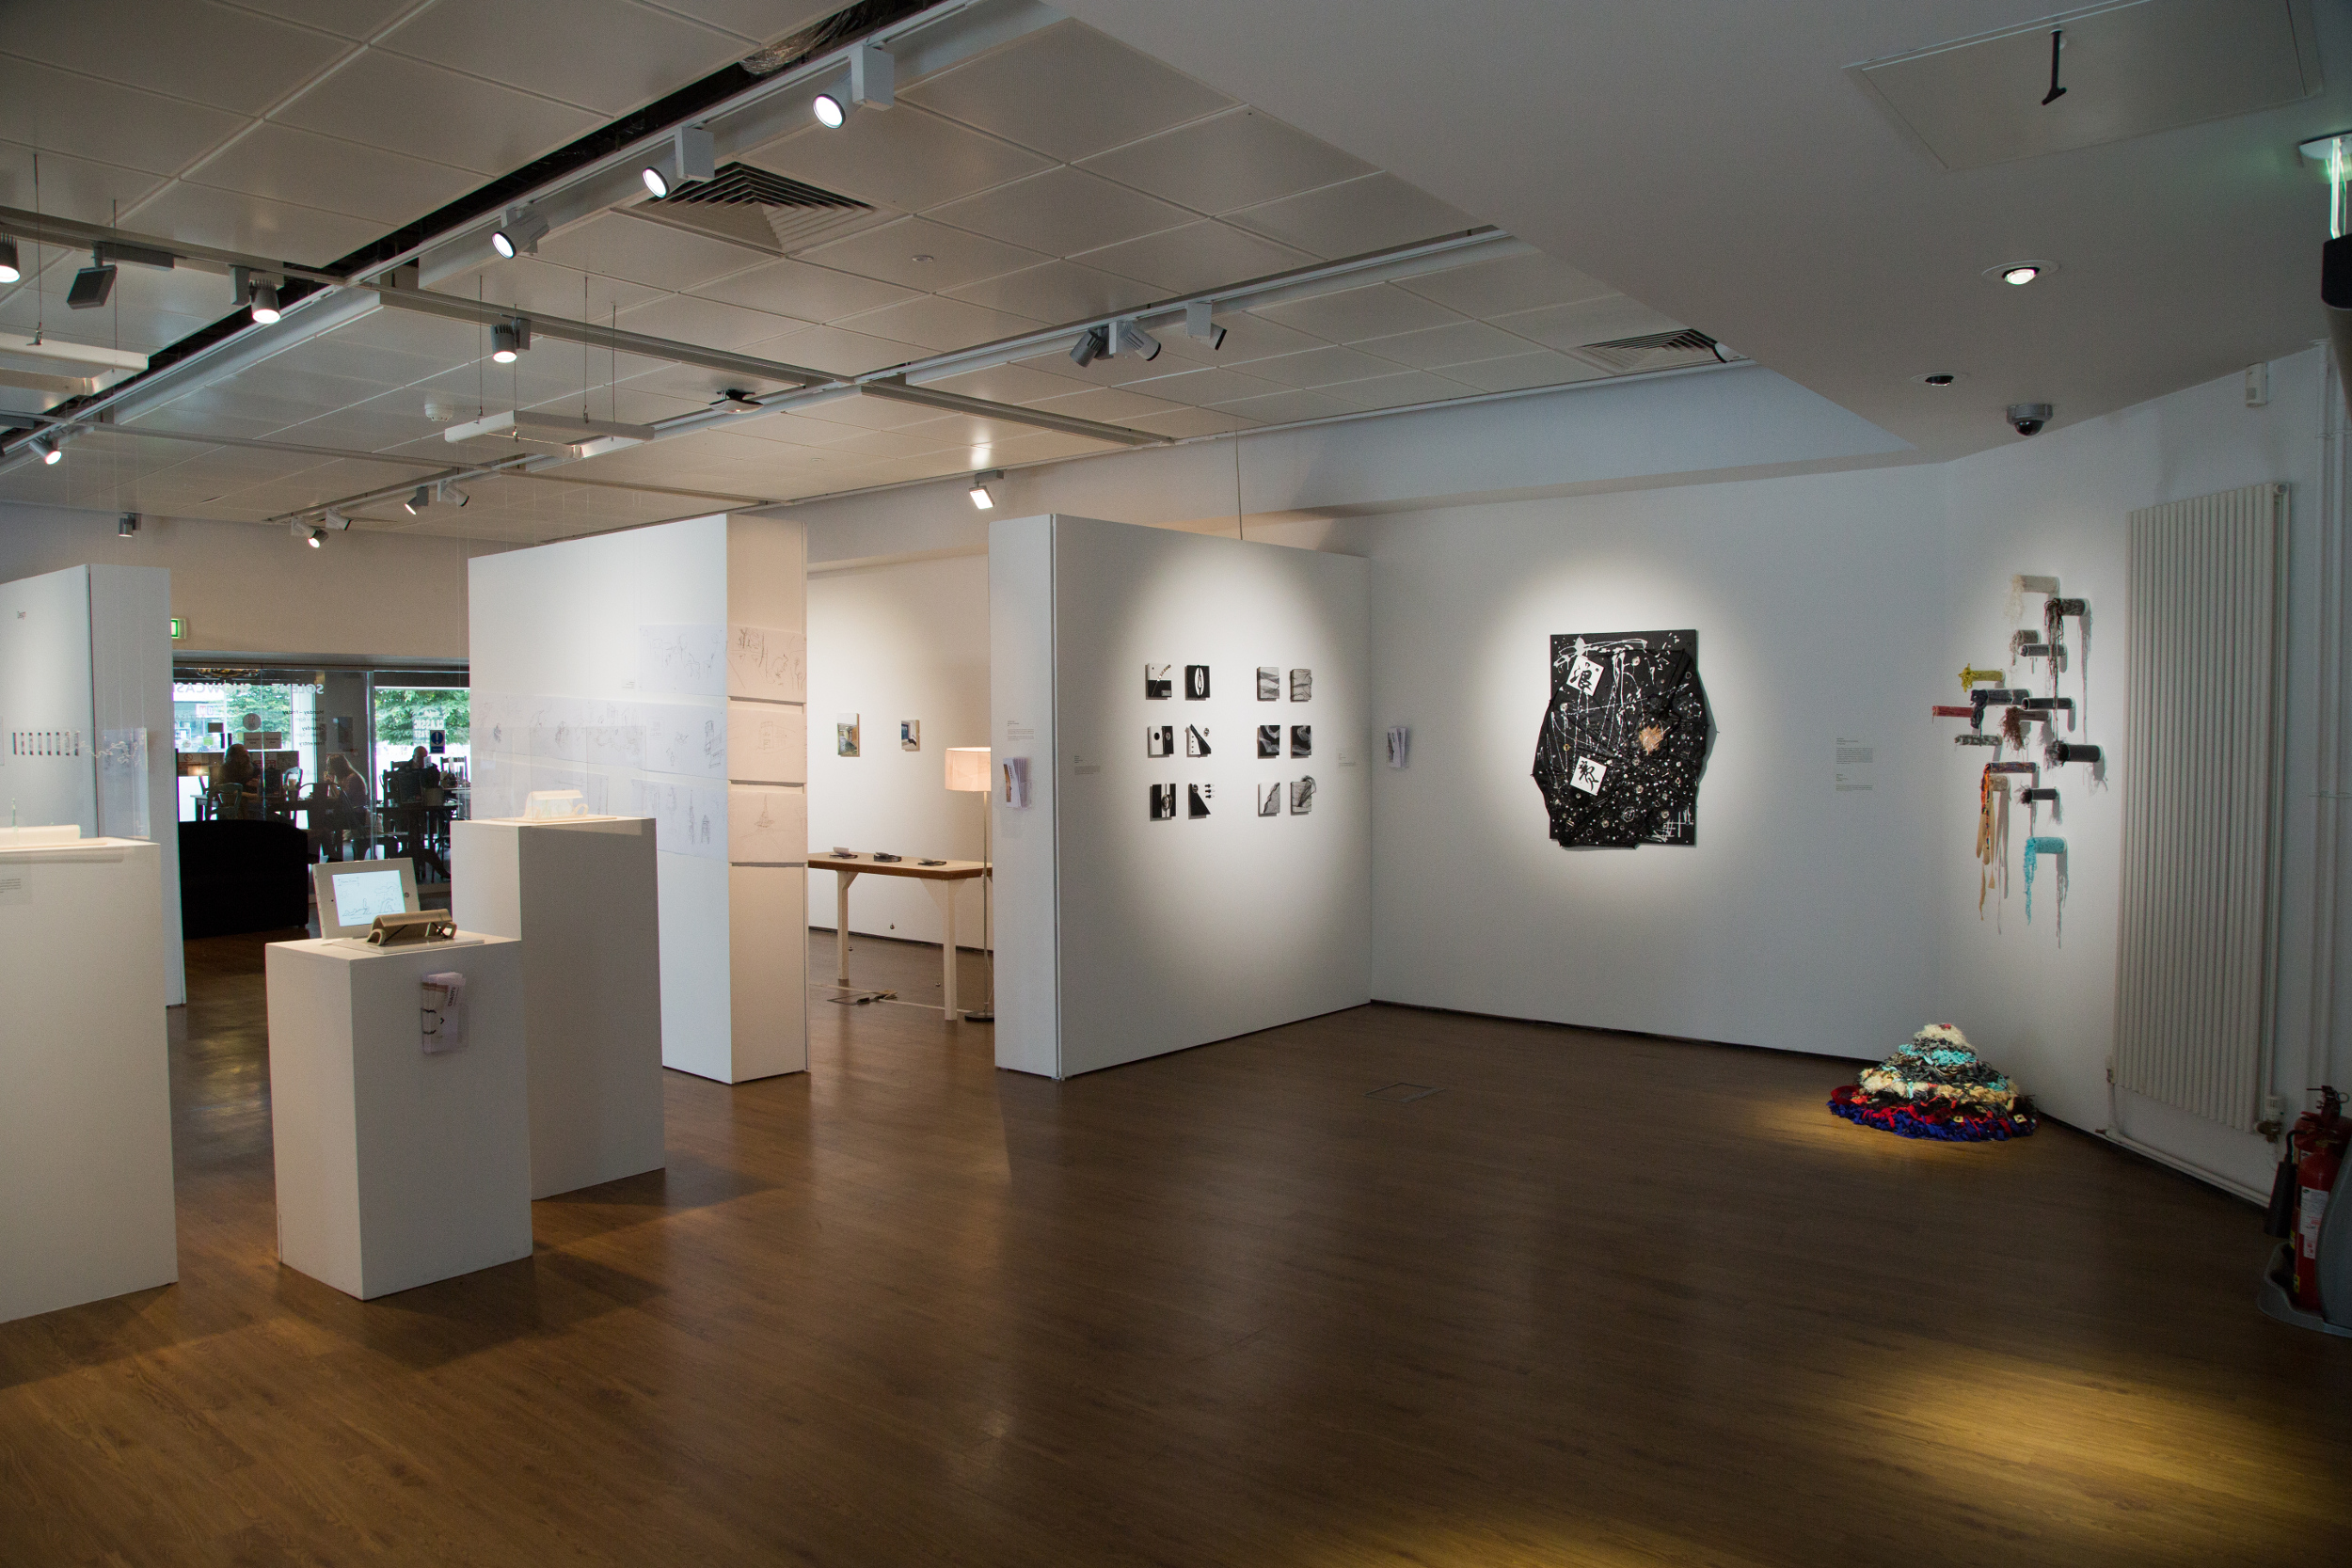 The TNCE exhibition in Solent's Showcase Gallery